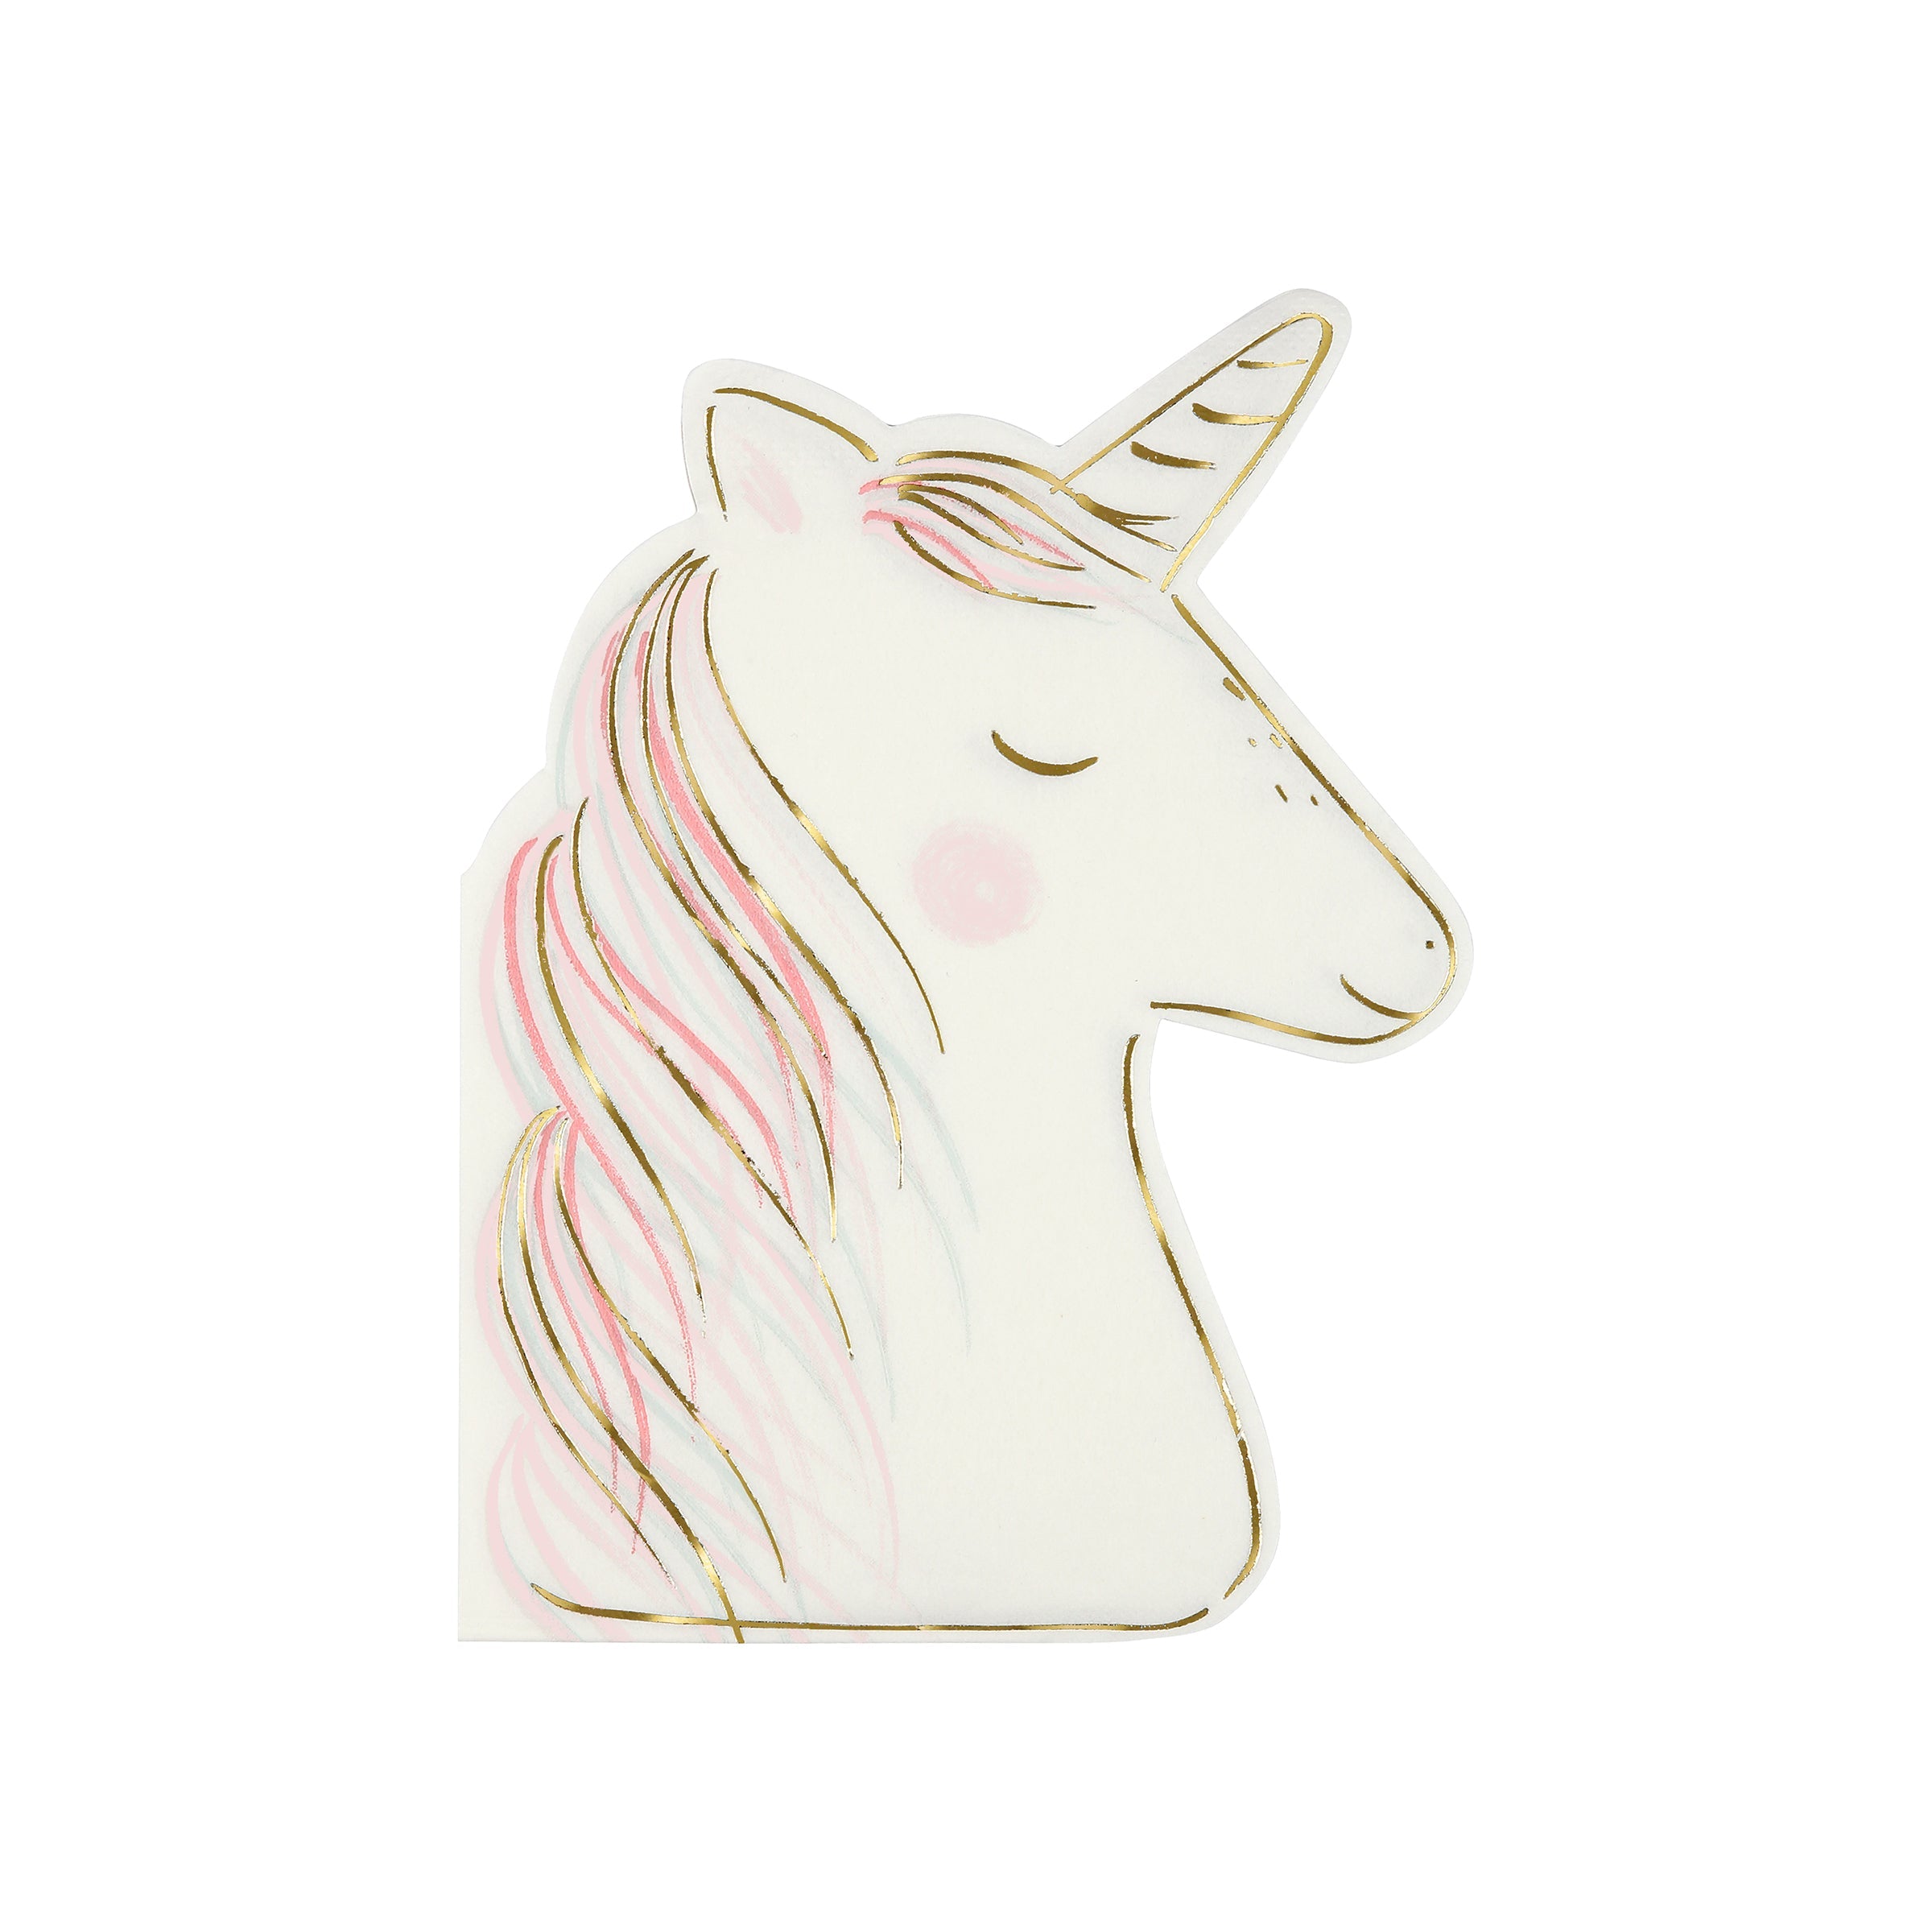 These napkins crafted in the shape of a magical unicorn, feature neon print and shiny gold foil detail.